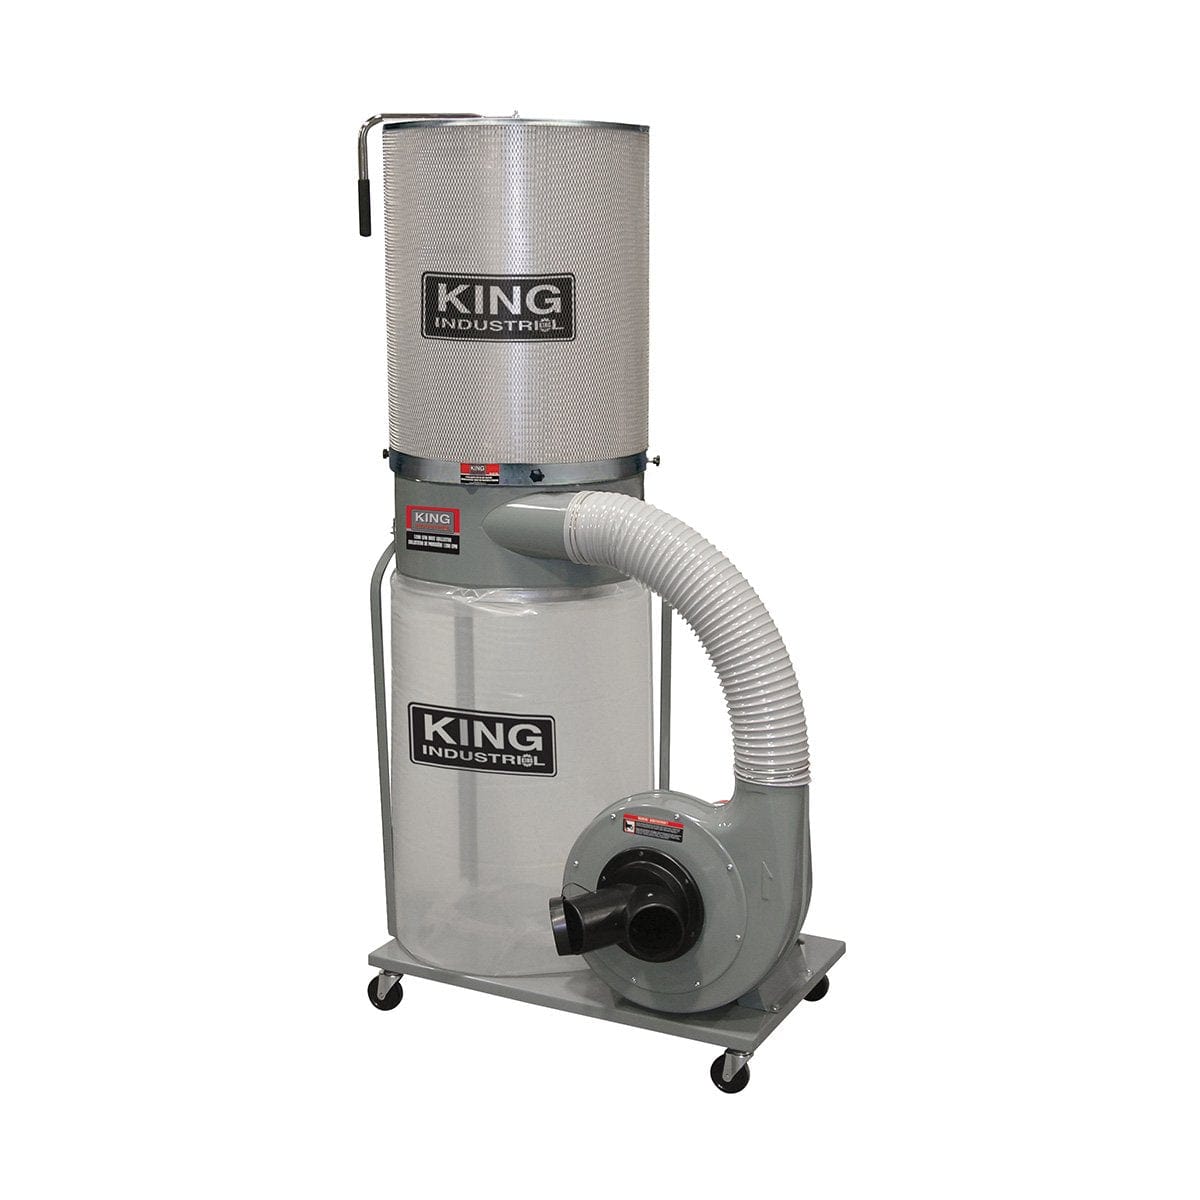 King Industrial KC-3105C/KDCF-3500 Dust Collector 1,200 CFM Dust Collector with Canister Filter